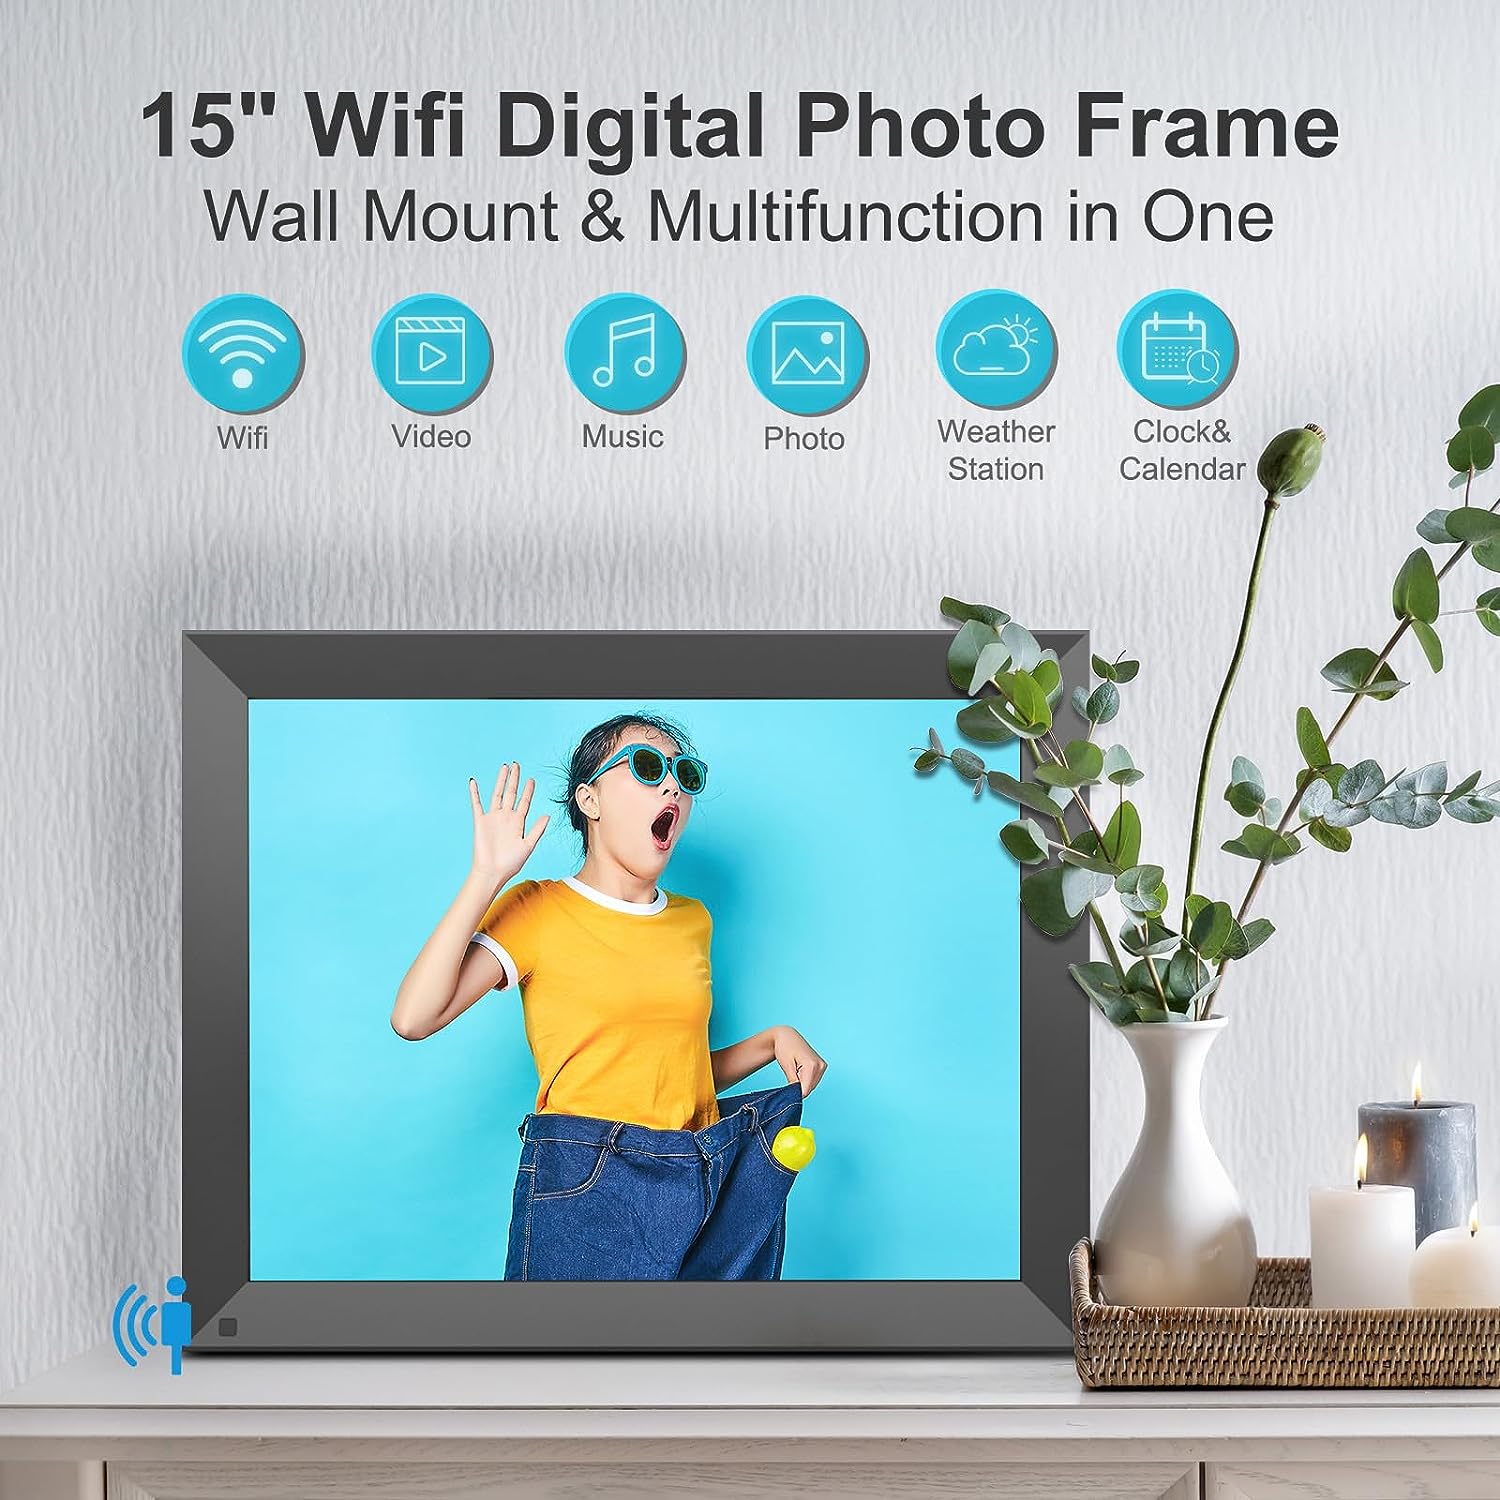 FULLJA 10 inch WIFI Digital Picture Frame Touch Screen IPS HD Display, Smart Digital Photo Frame, 16GB Storage, Auto-Rotate, Motion Sensor, Share Photos and Videos via iOS or Android App, Email, Cloud